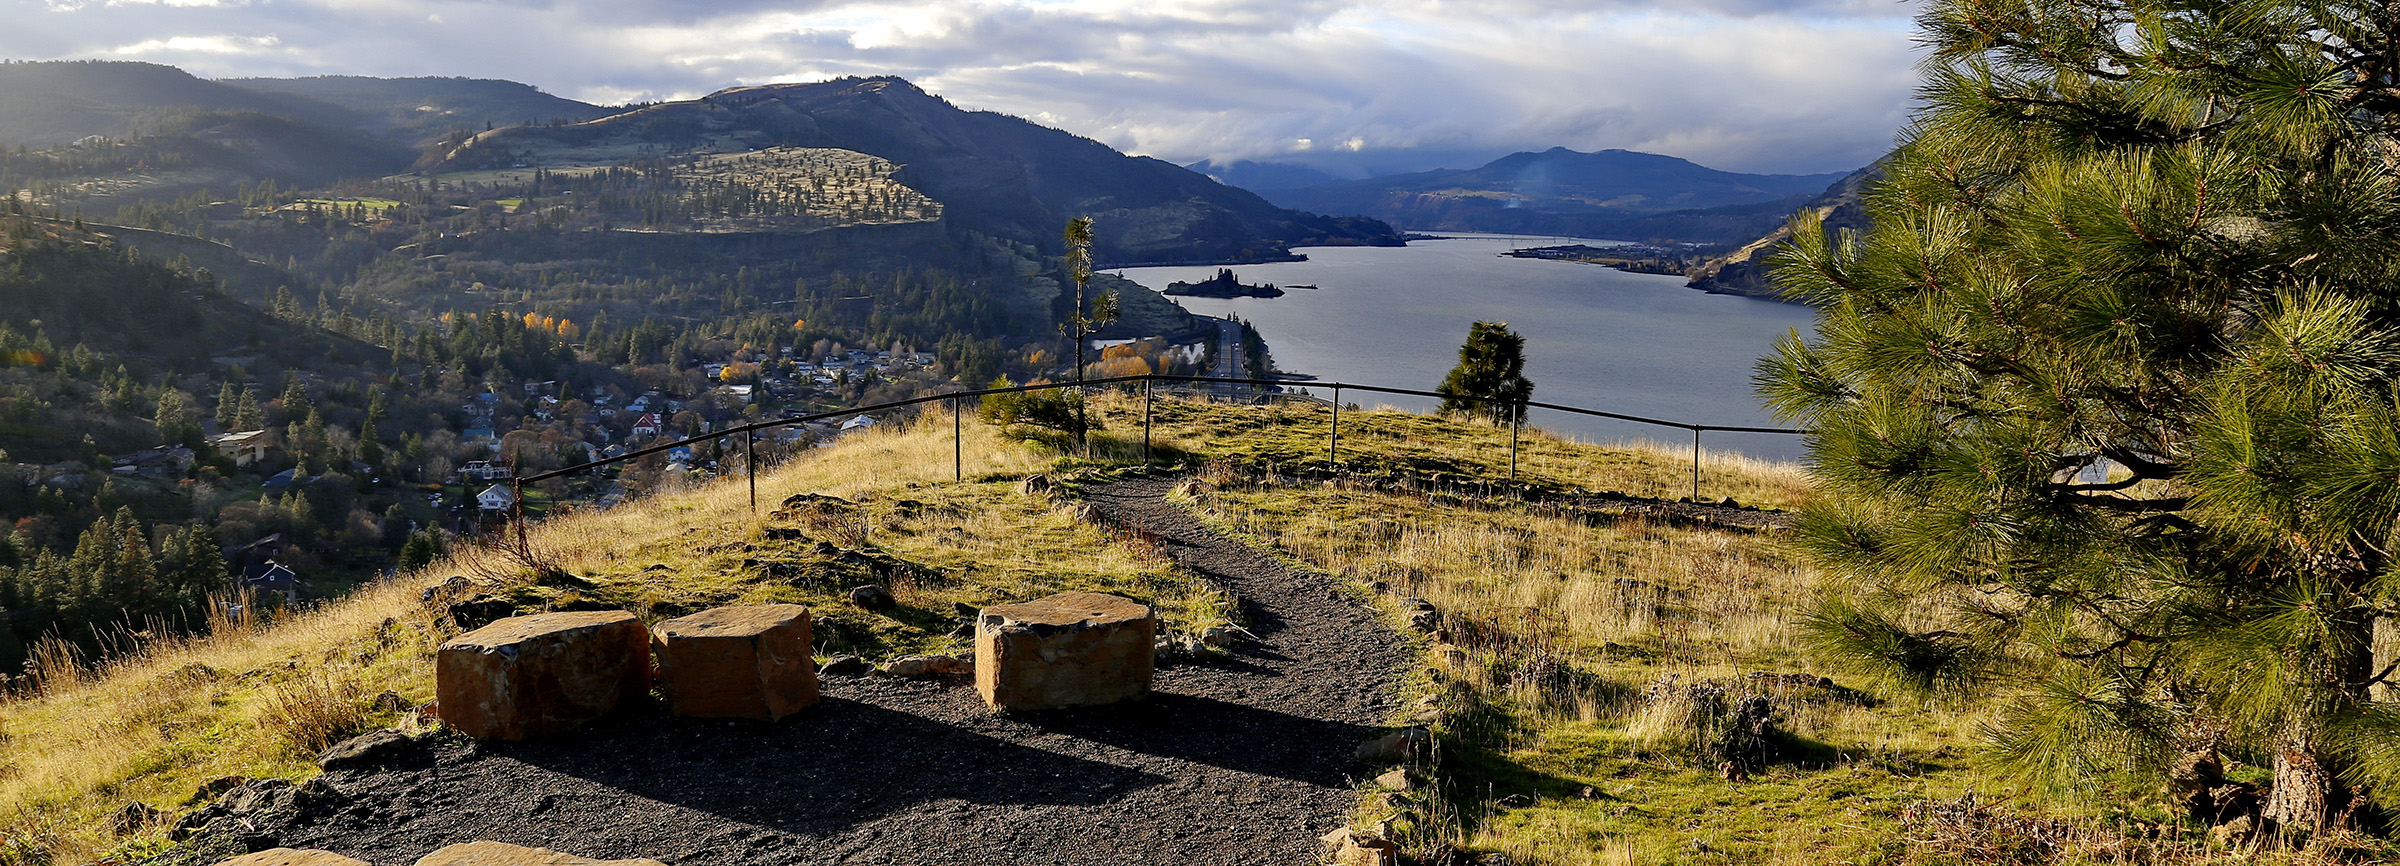 About Friends of the Columbia Gorge Land Trust